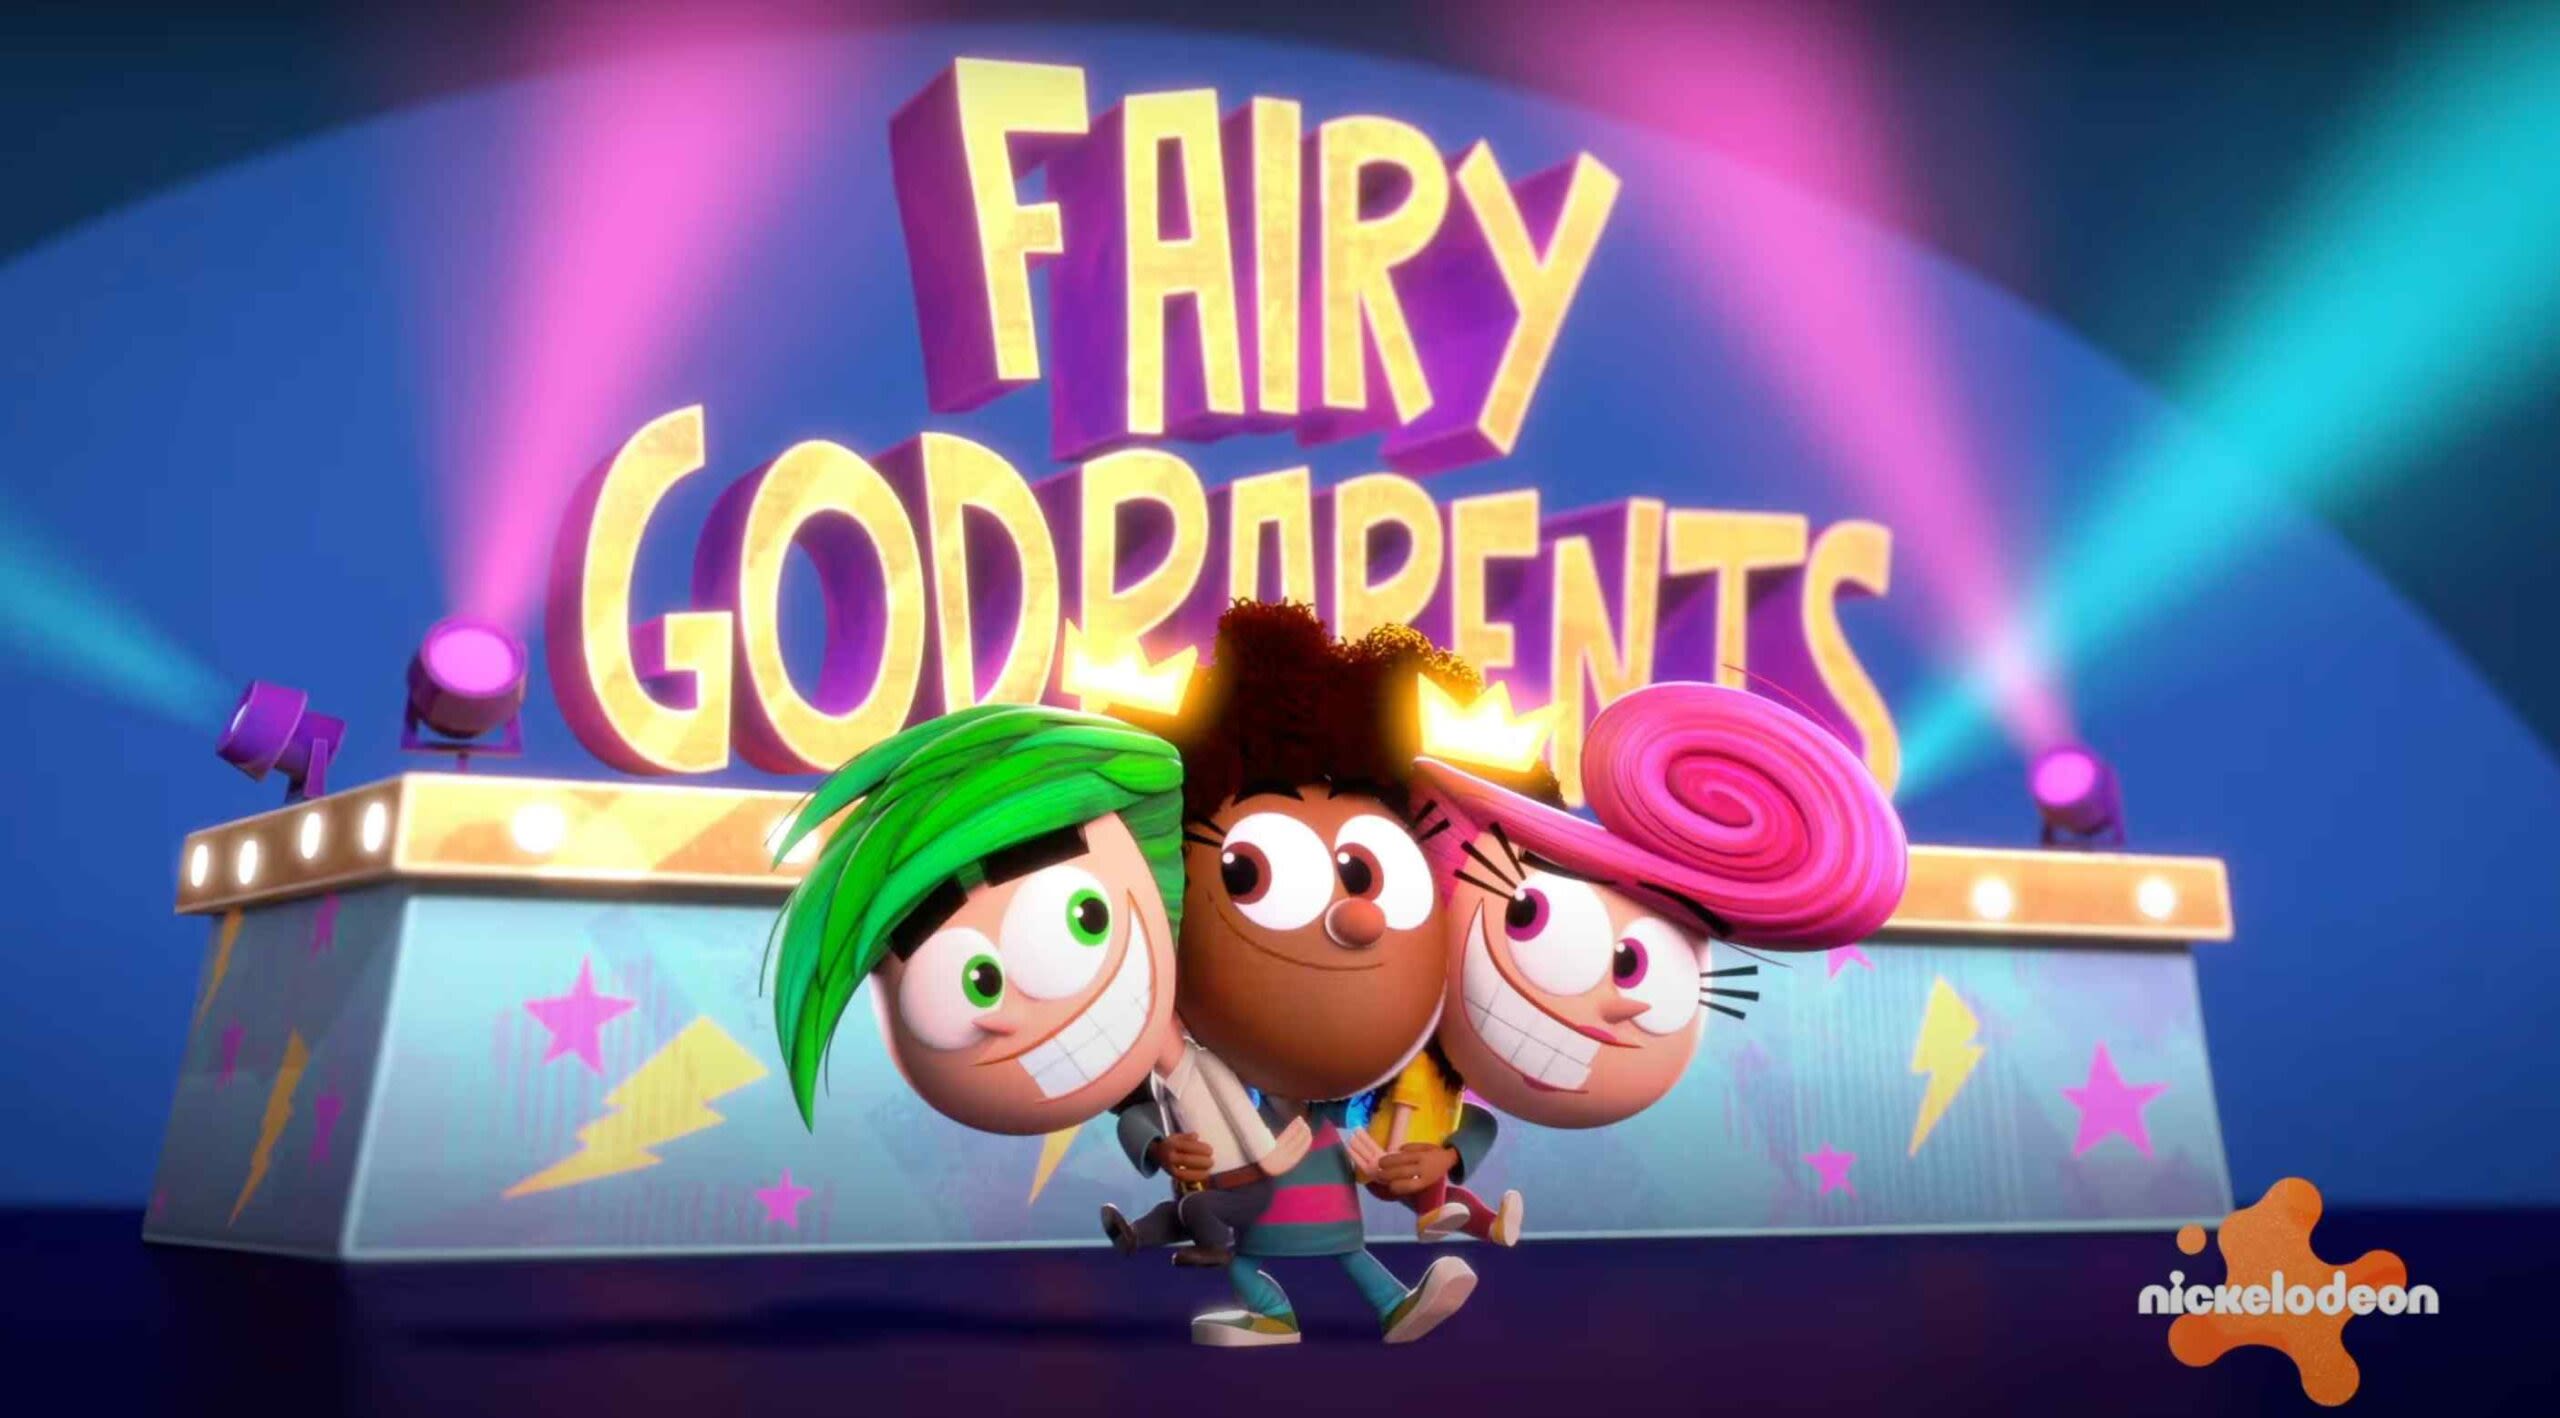 ‘The Fairly OddParents: A New Wish’ Trailer: Cosmo And Wanda Have A Young Black Girl As Their New Godchild